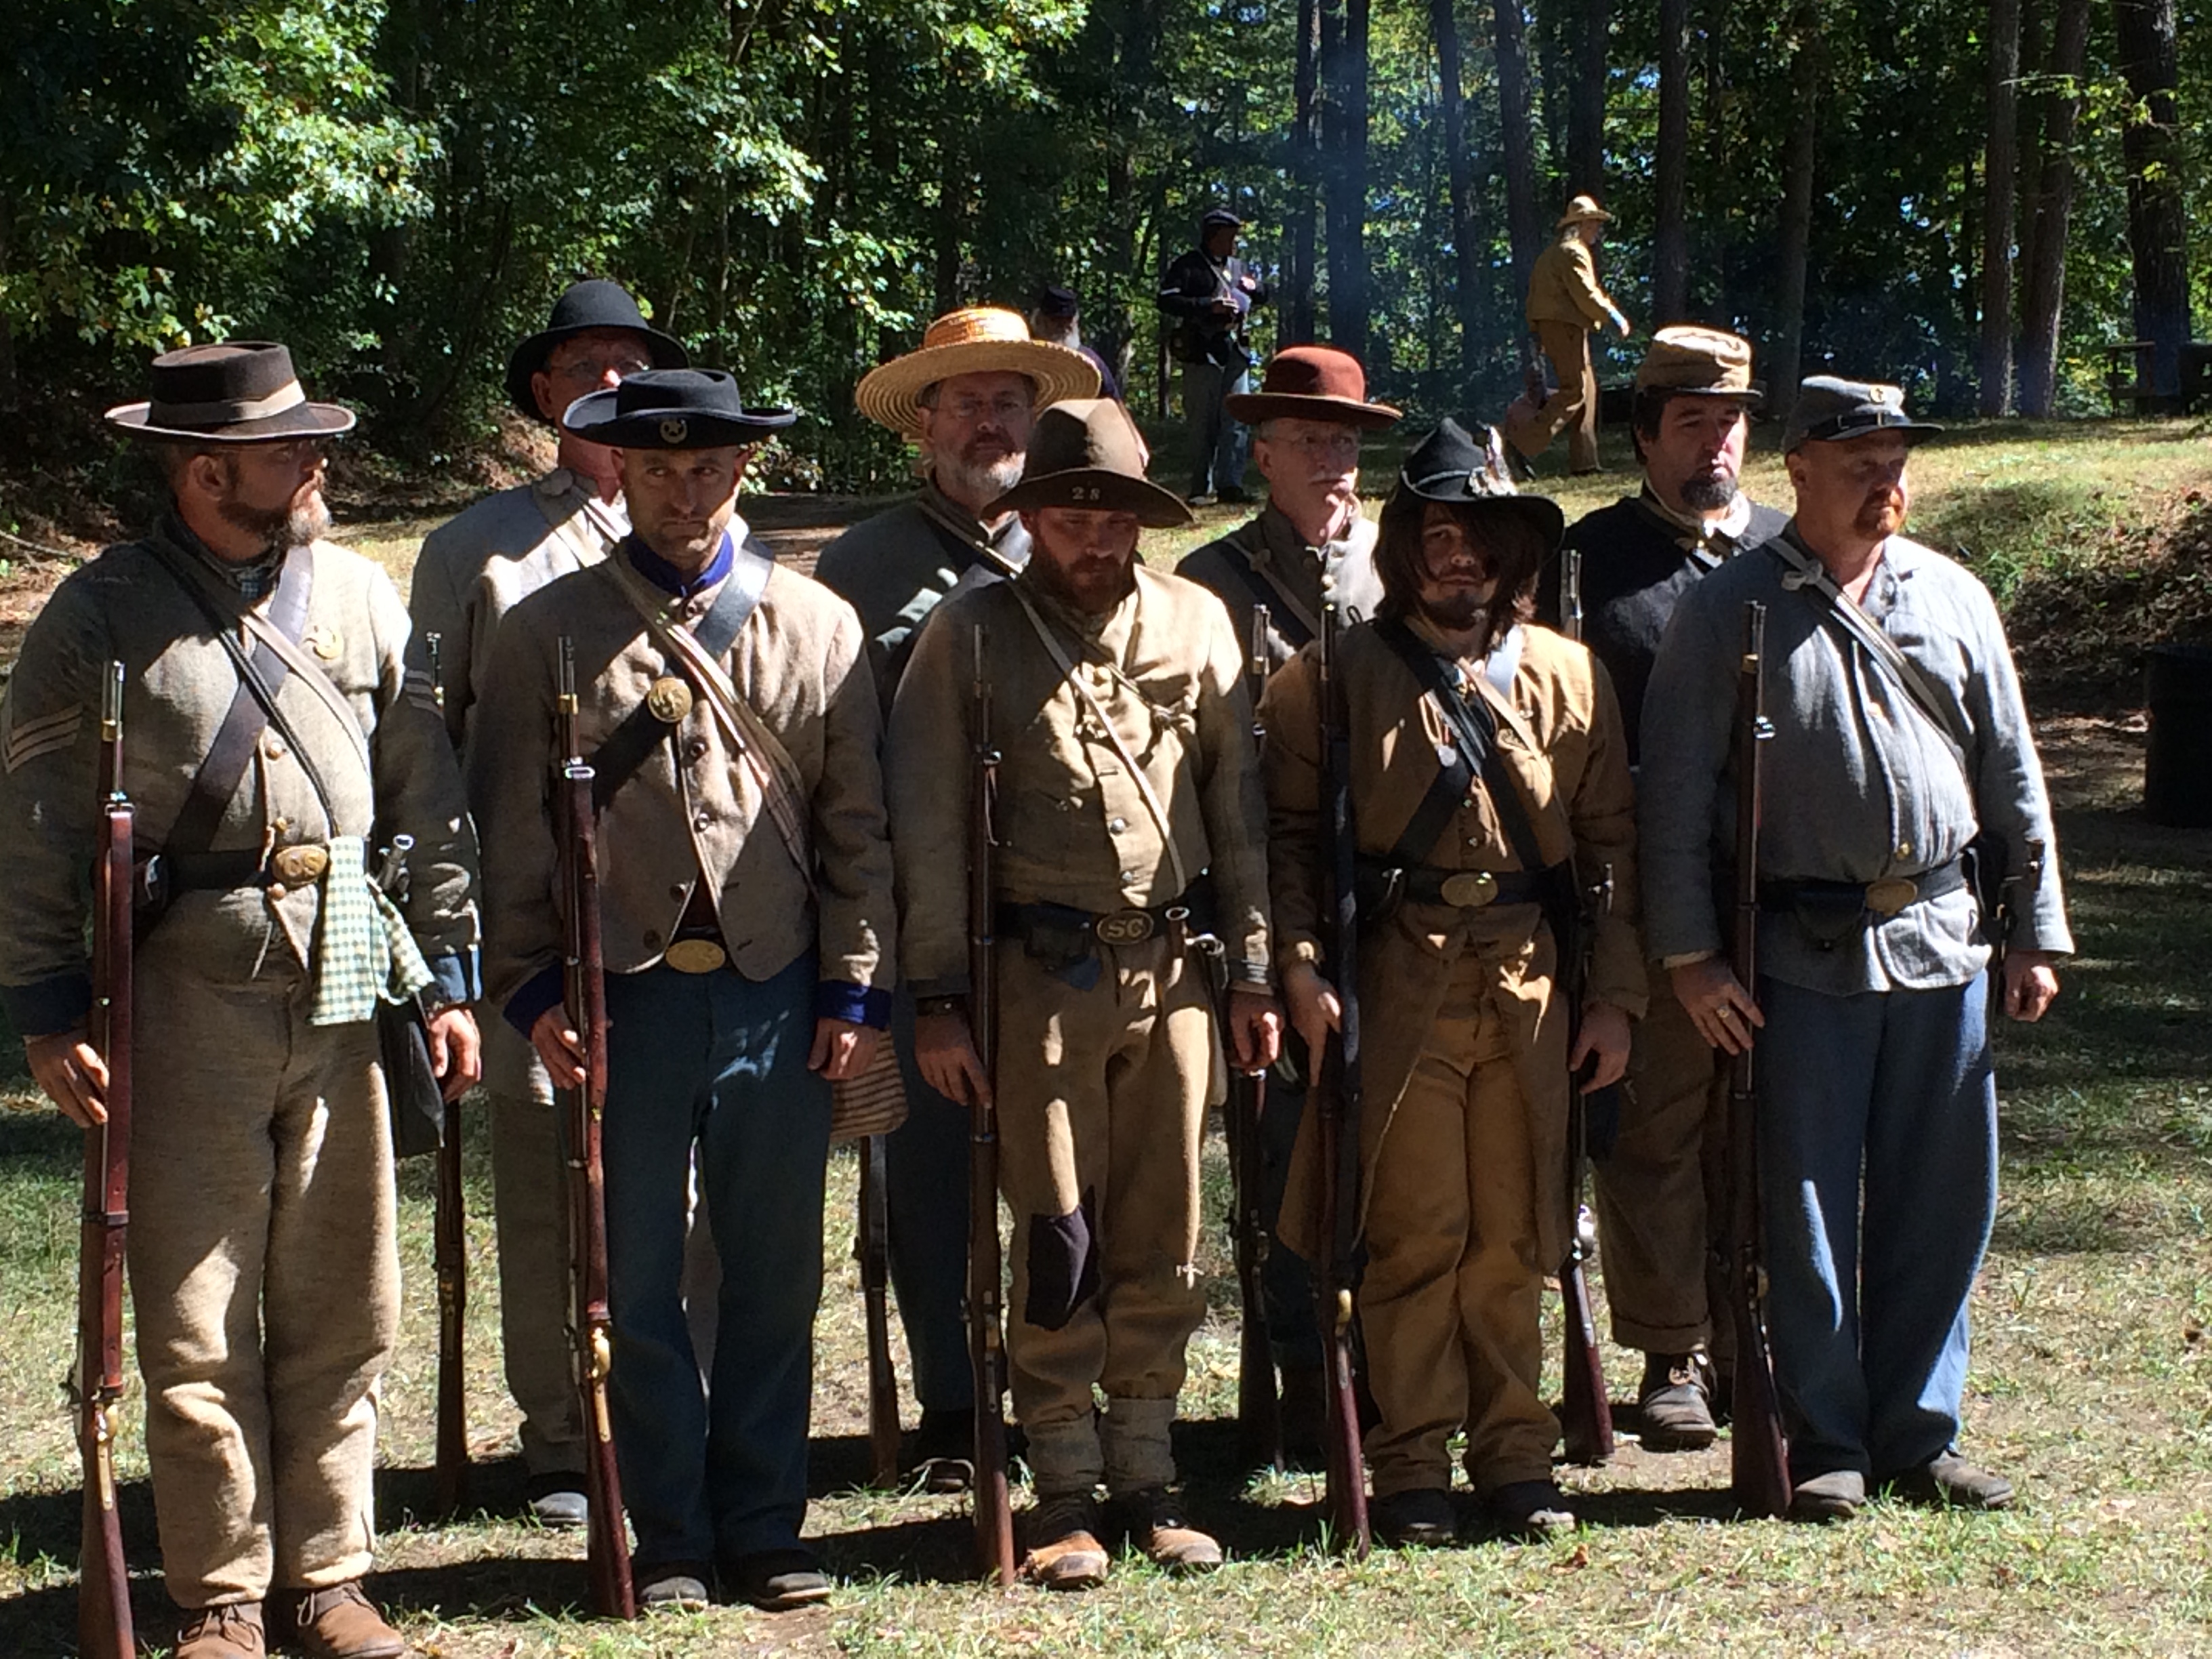 Reenactment of Confederate Soliders